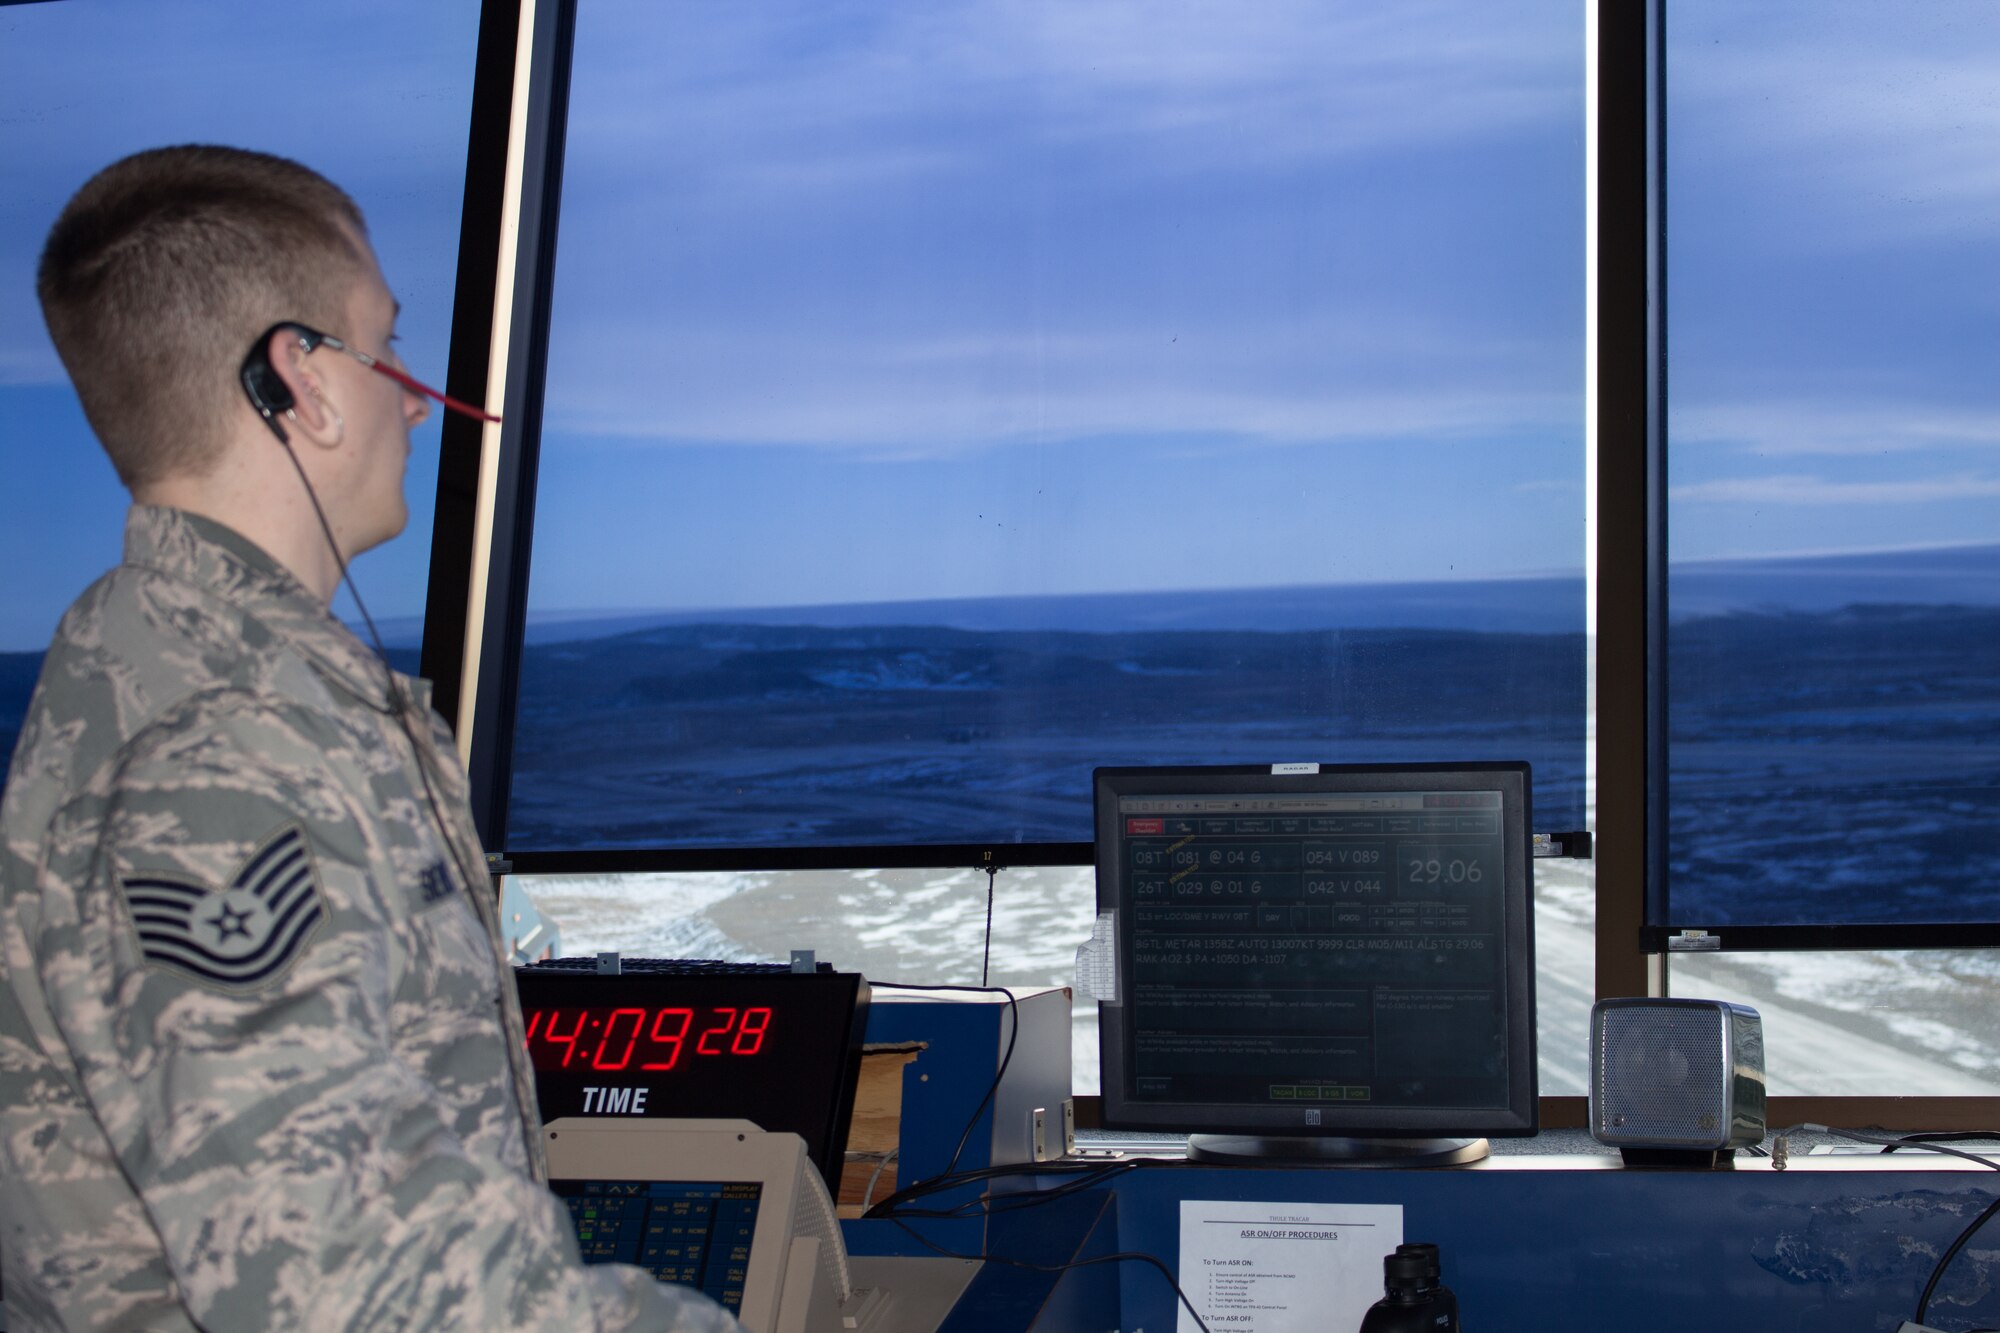 Tech. Sgt. Joseph Sievert, air traffic controller for the 821st Support Squadron, watches for inbound aircraft while working the local control position at Thule AB Sept. 30. The aircraft were carrying cargo to resupply Canadian Forces Station Alert and Eureka Research Station to get them through the harsh winter as a part of Operation Boxtop. (U.S. Air Force photo/Tech. Sgt. Jason Brumbaugh)